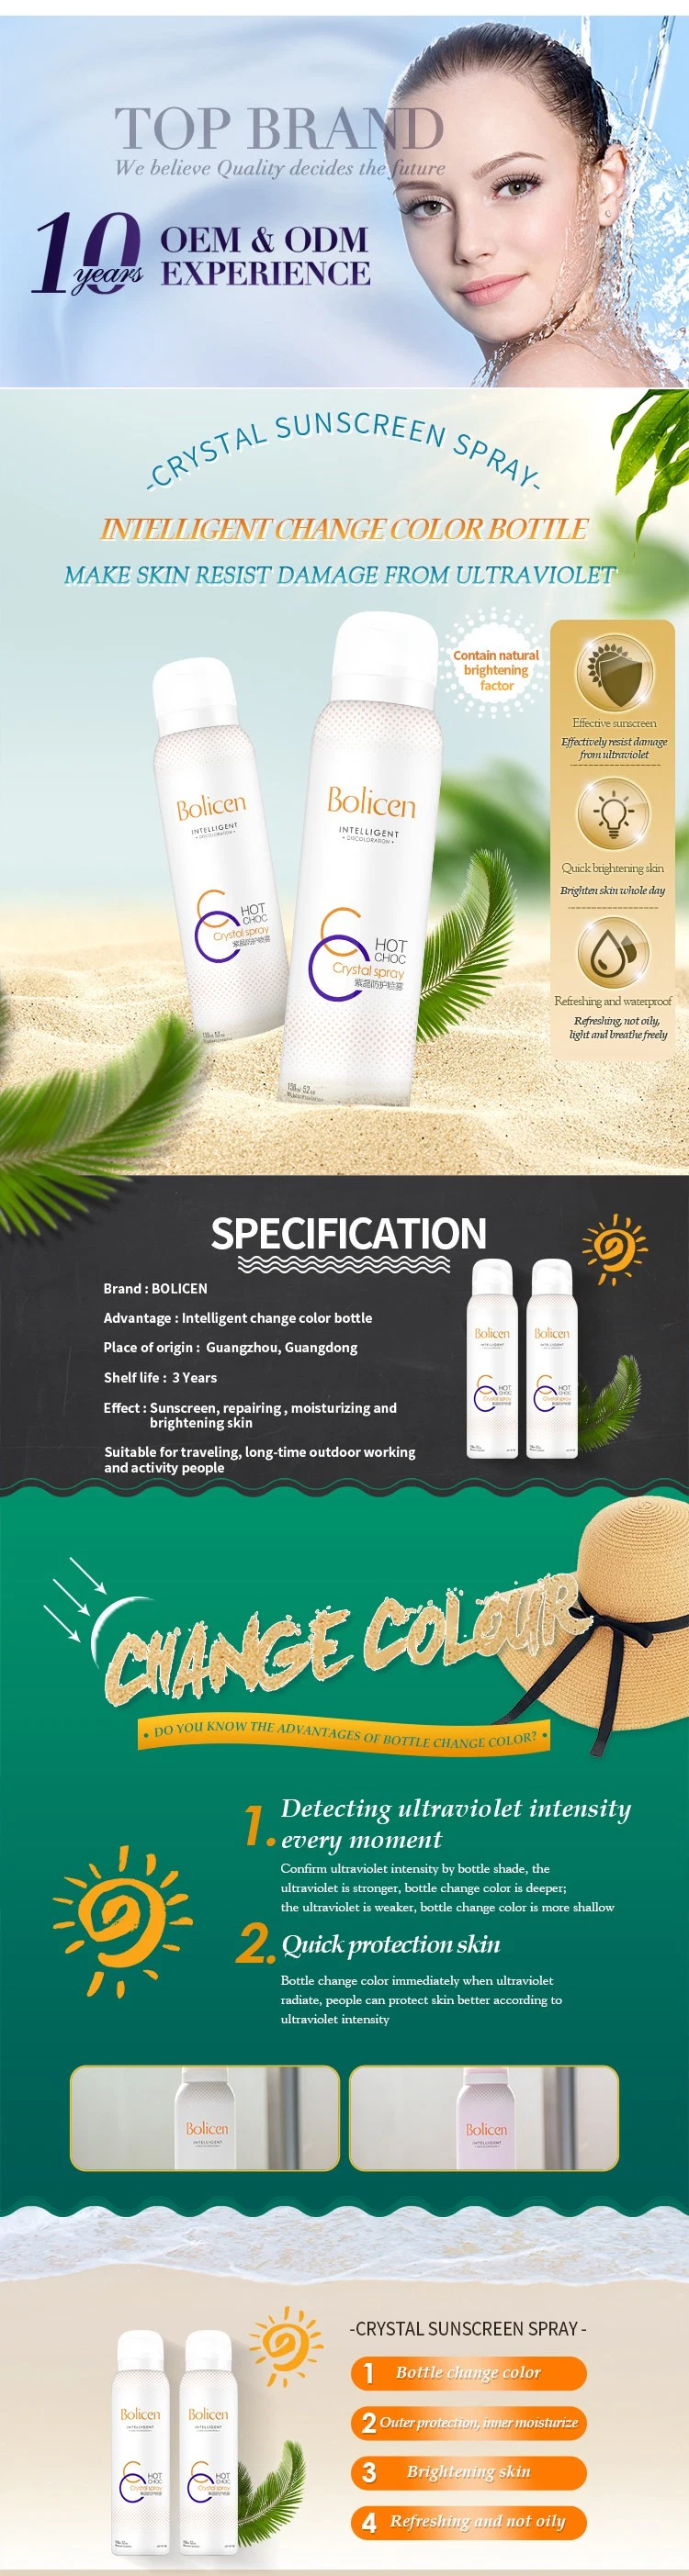 OEM Applies to Face and Body Waterproofing Lotion Sunscreen Sprays